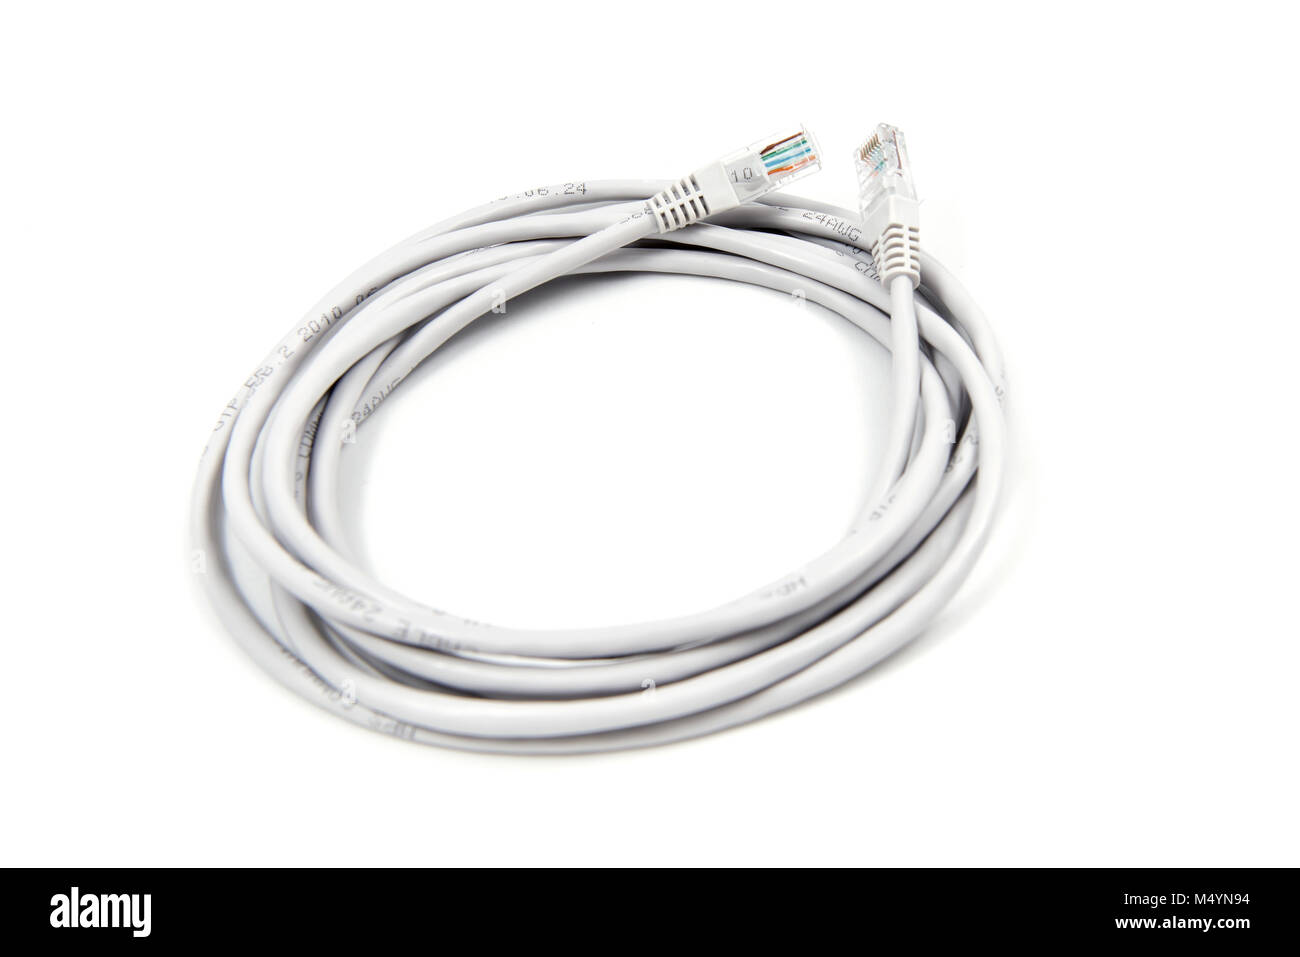 lan cable on white background Stock Photo